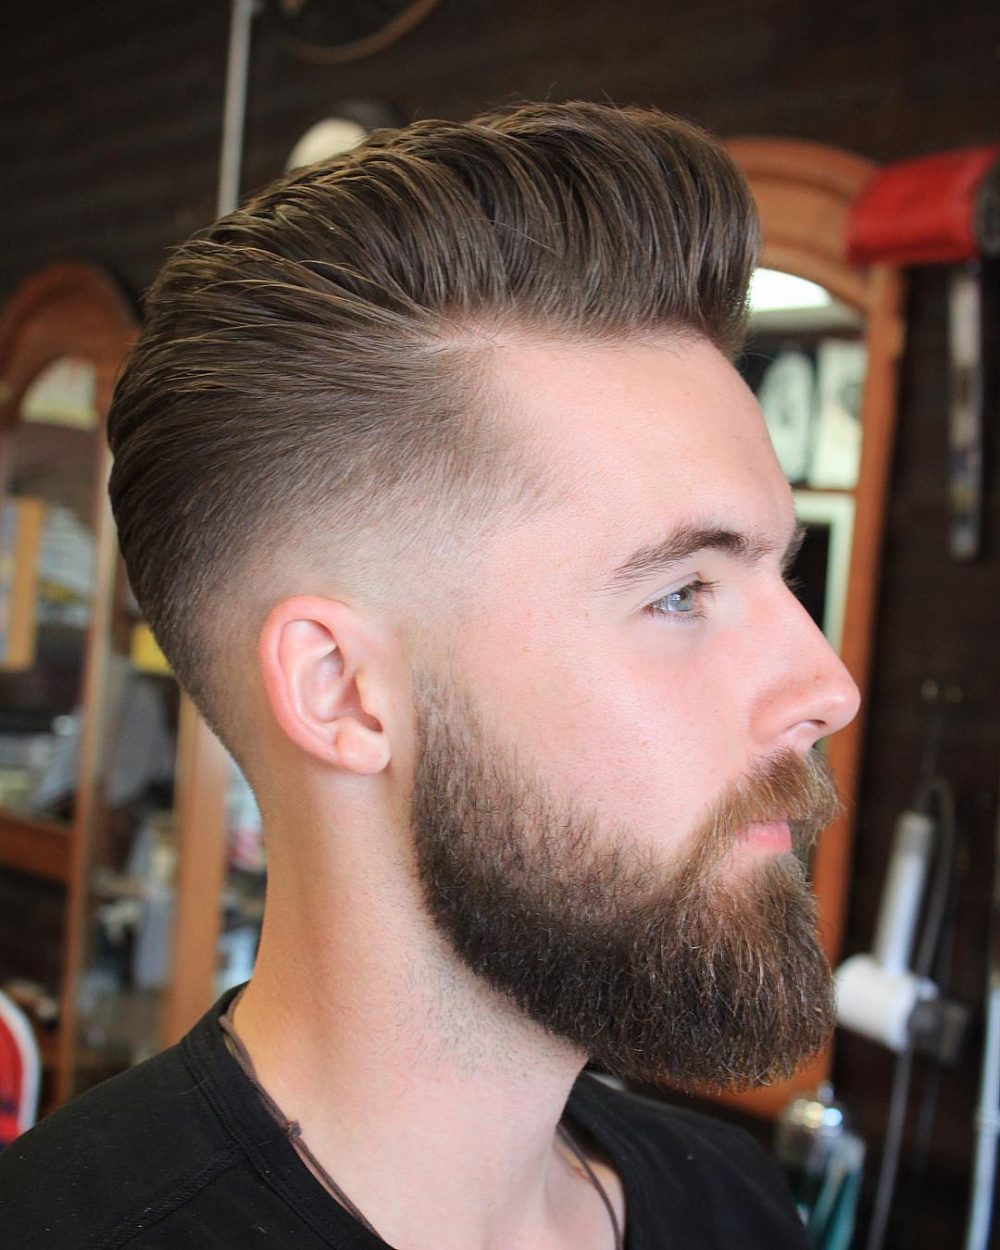 The Low Fade Pompadour with a Maintained Beard